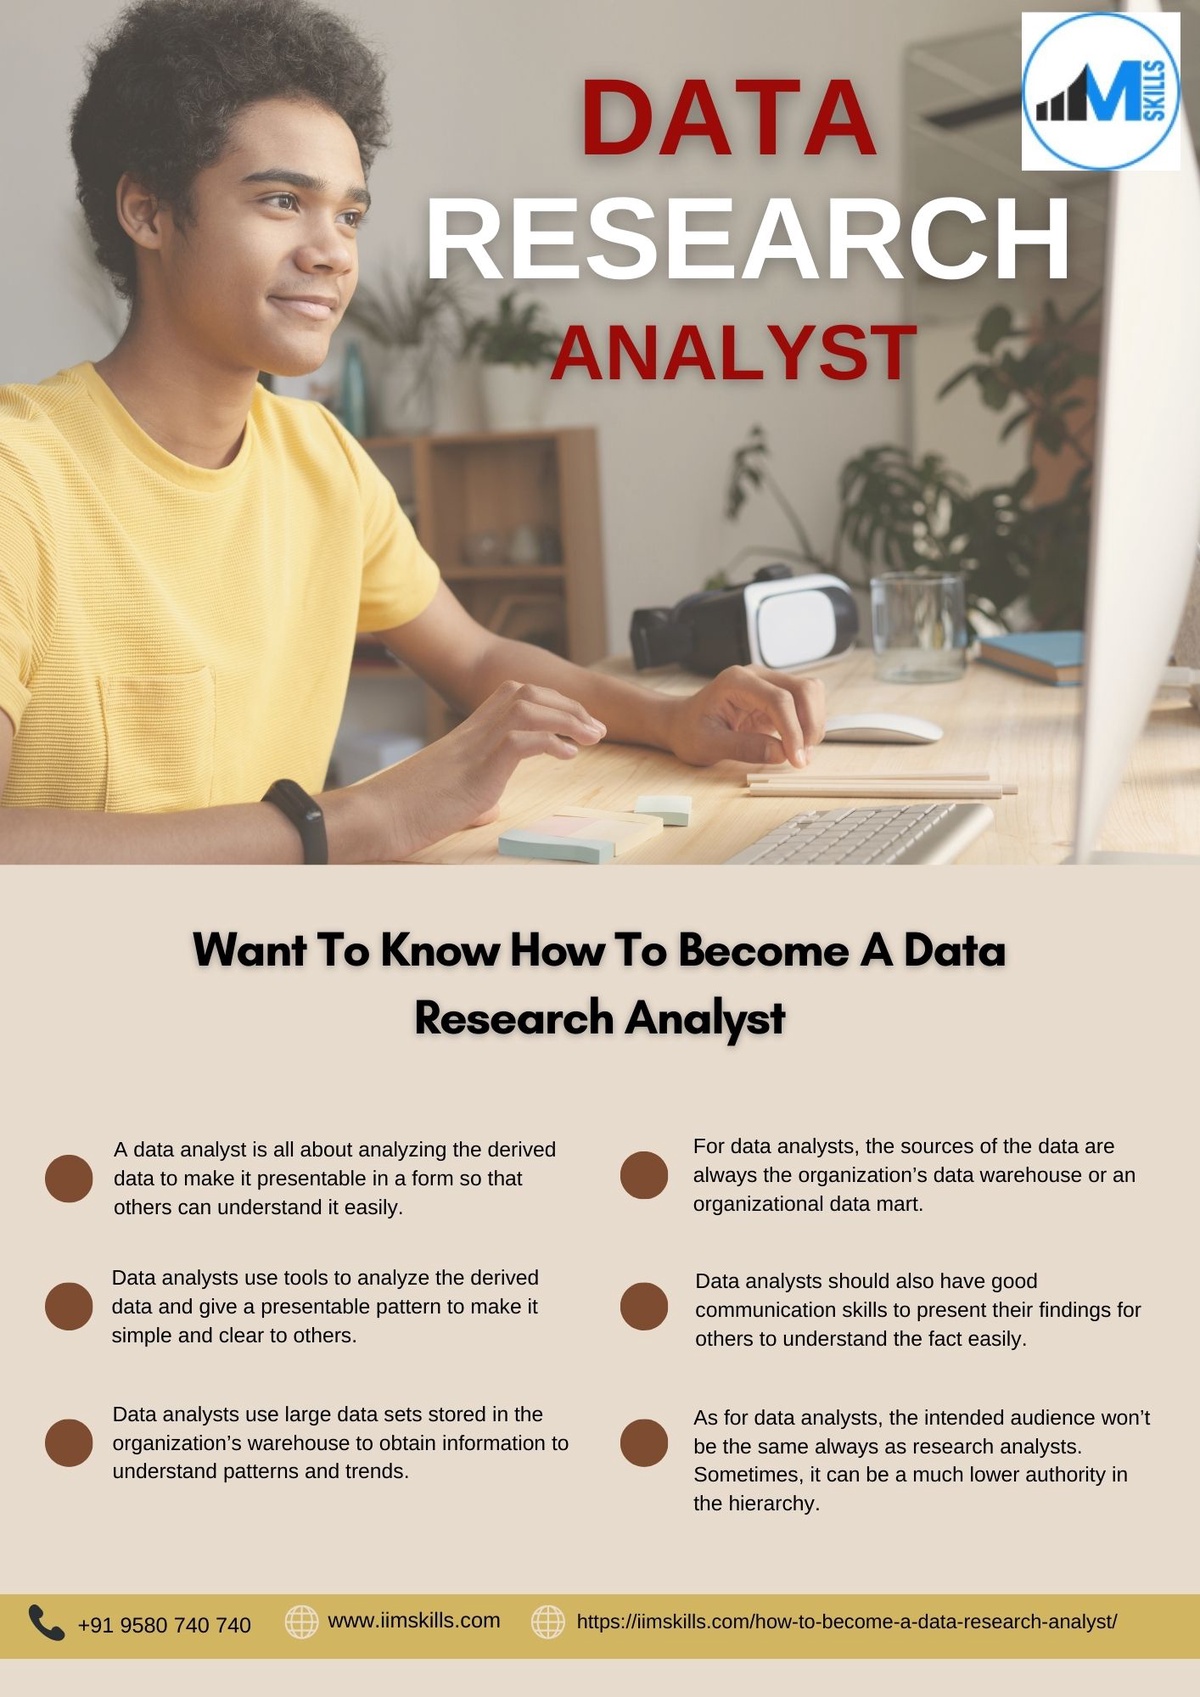 How To Become A Data Research Analyst-Importance of Data Analytics-Why it is vital in today’s age!